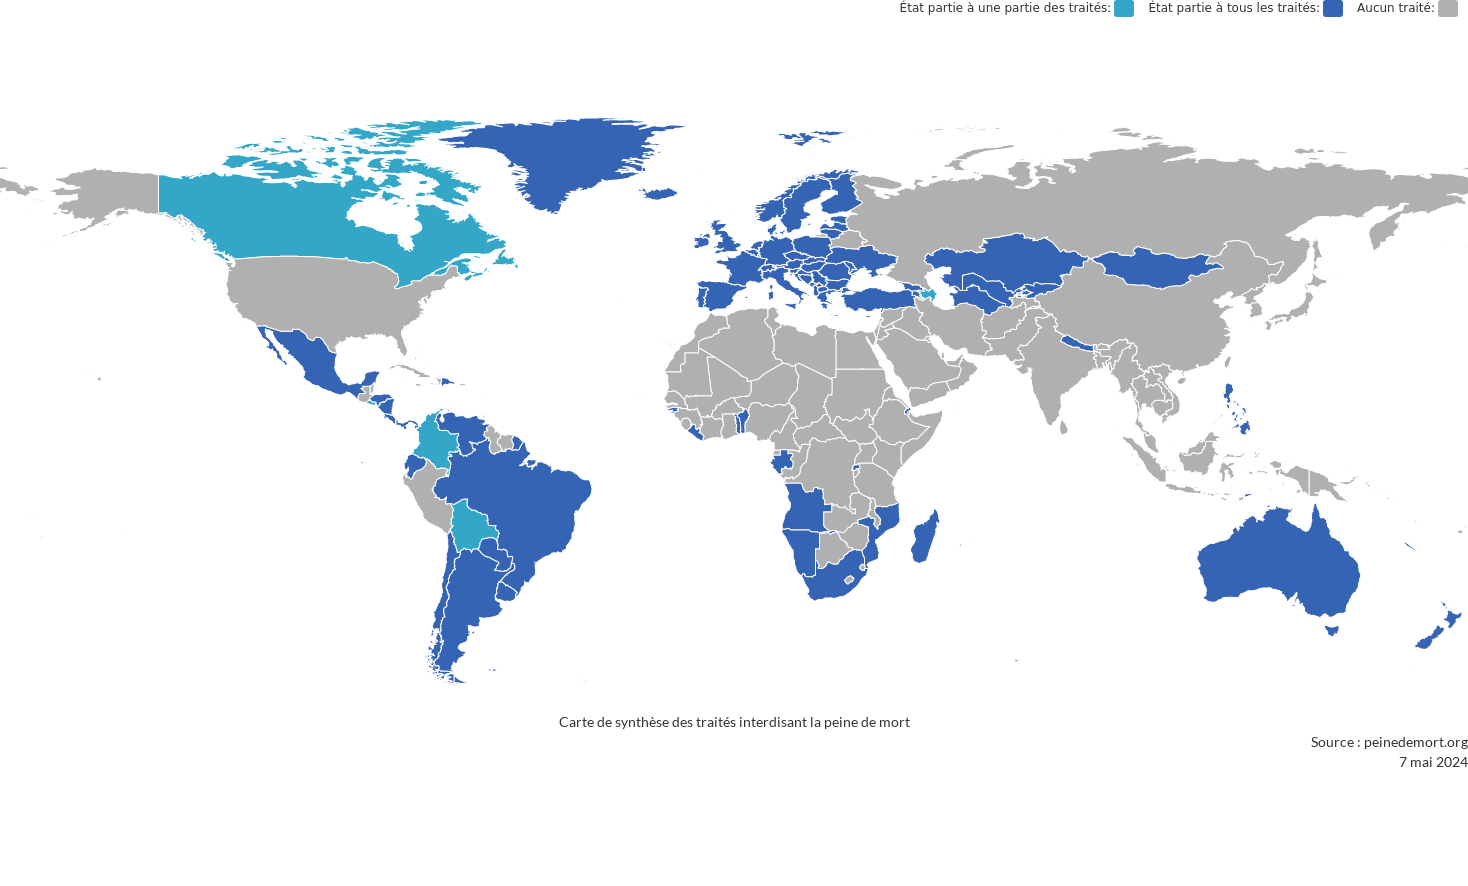 Map of ratifications of International and regional treaties aimed at the abolition of the death penalty